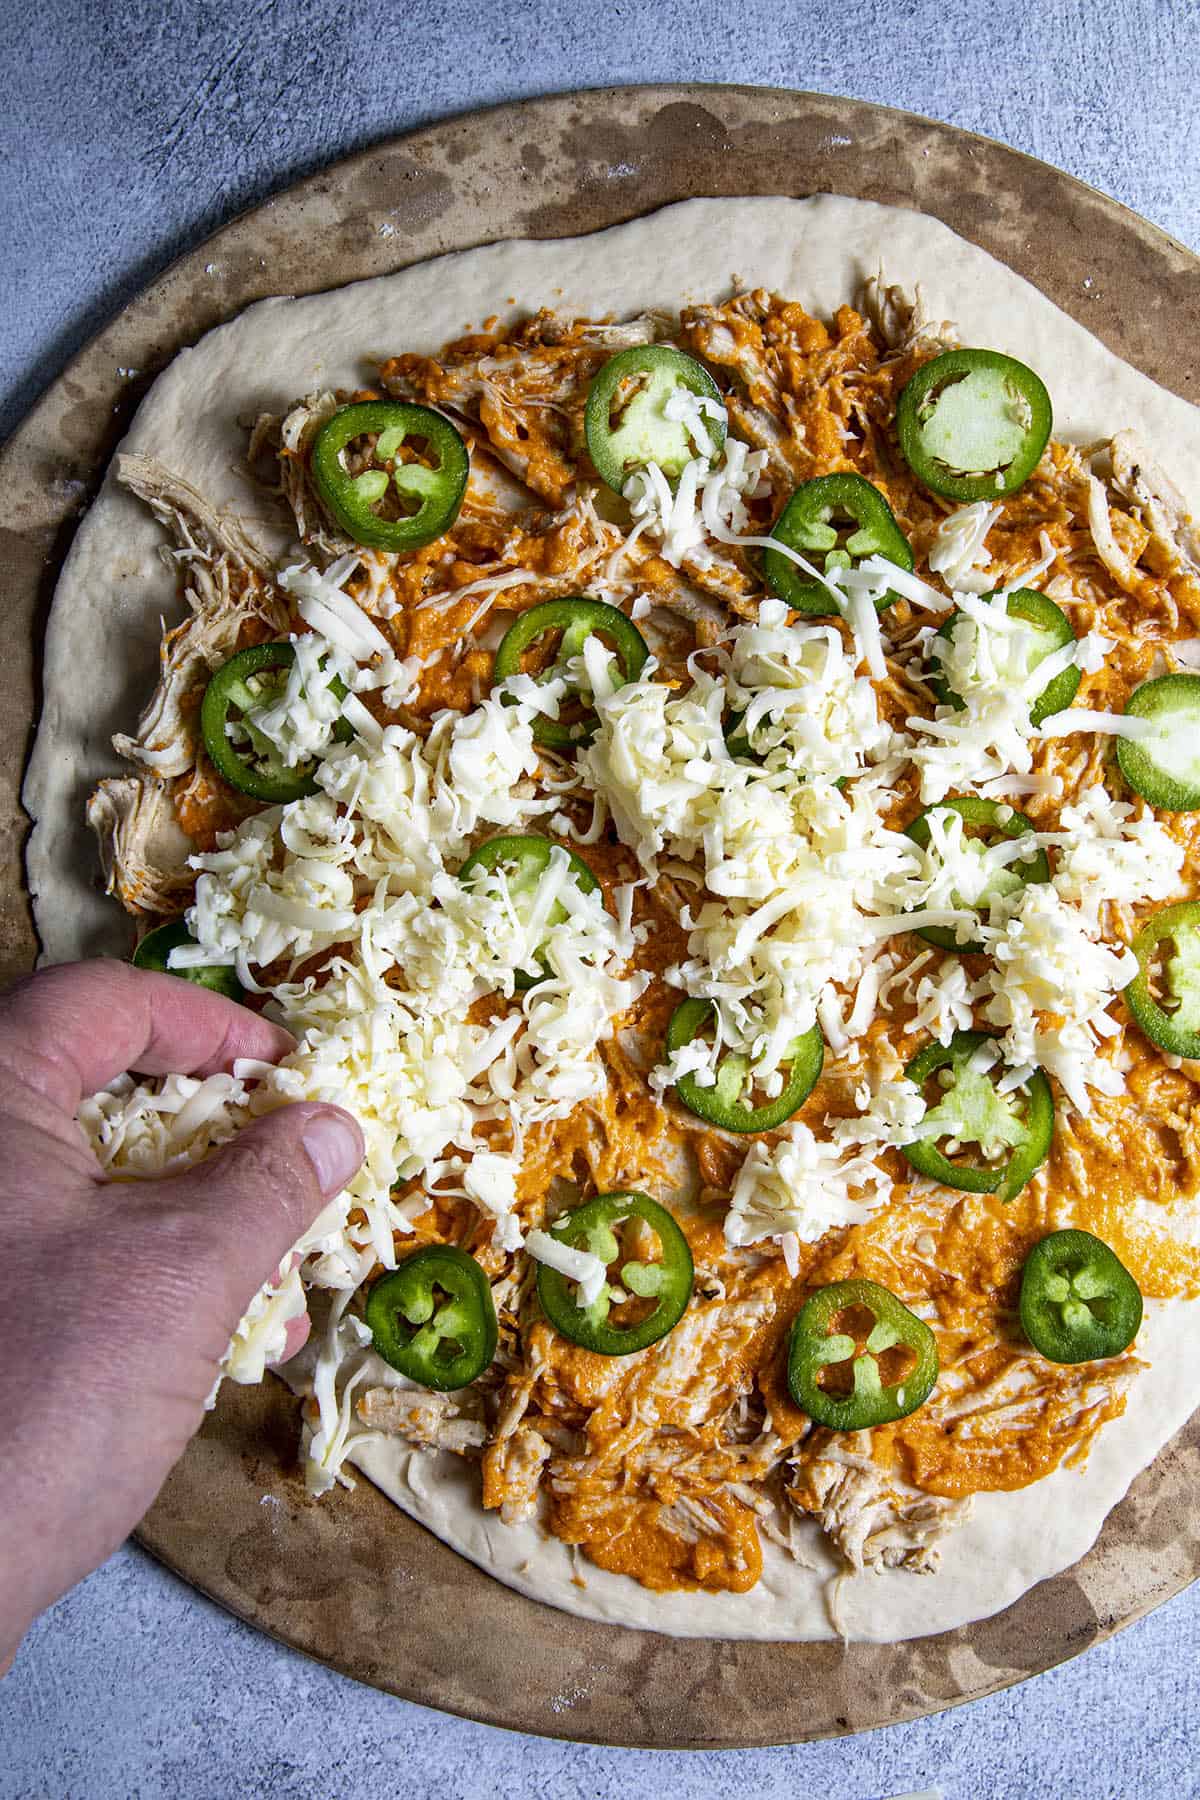 Adding cheese to the Buffalo Chicken Pizza